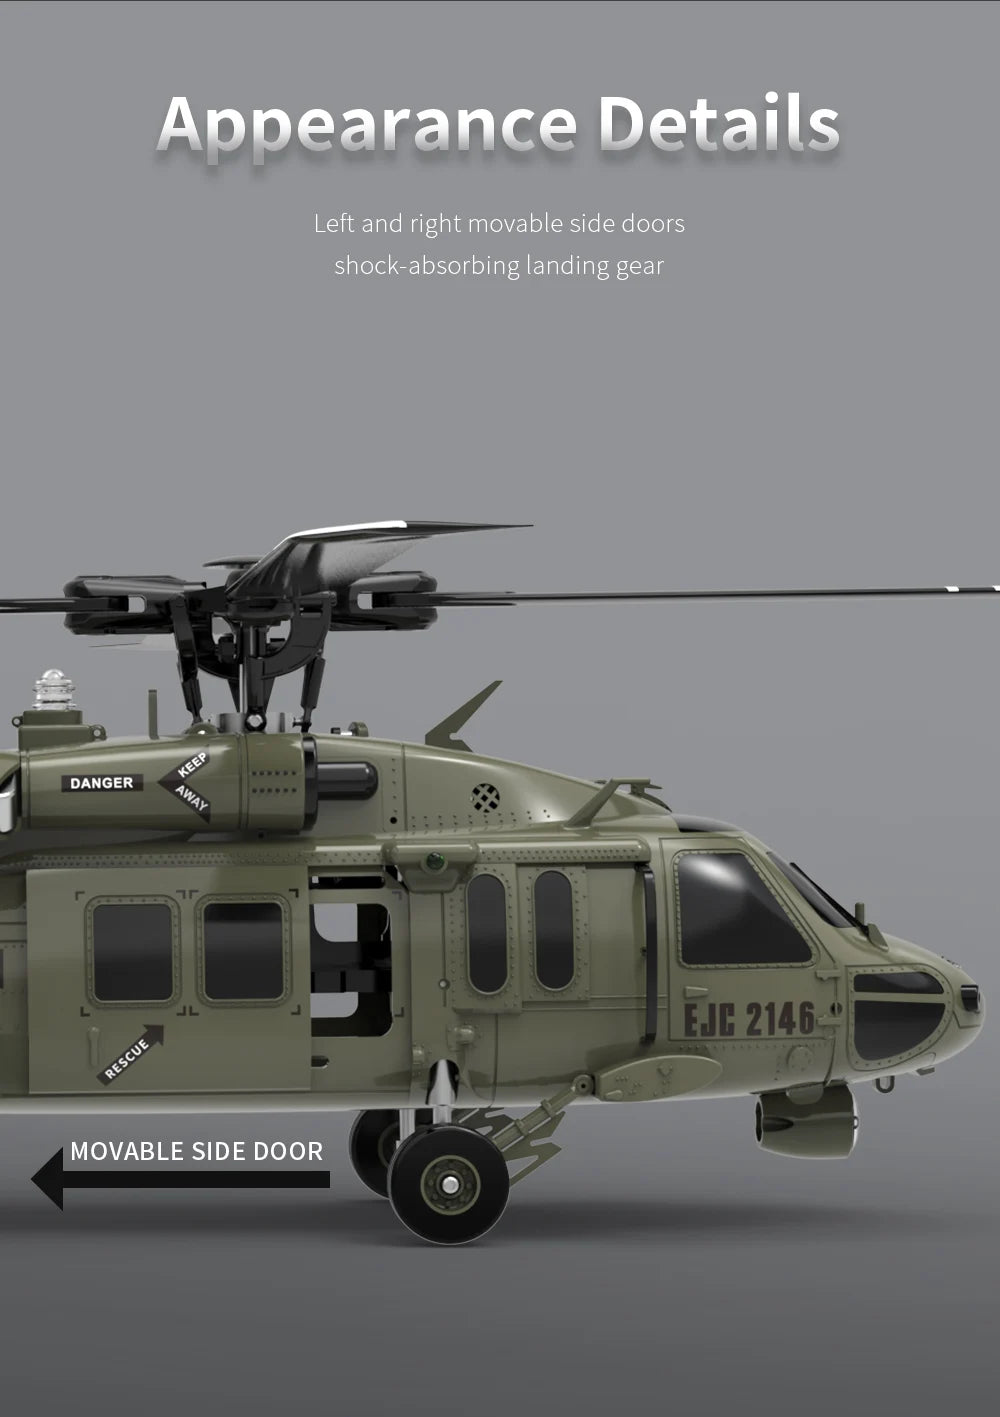 YXZNRC F09 RC Helicopter, Appearance Details Left and right movable side doors shock-absorbing landing gear DANG